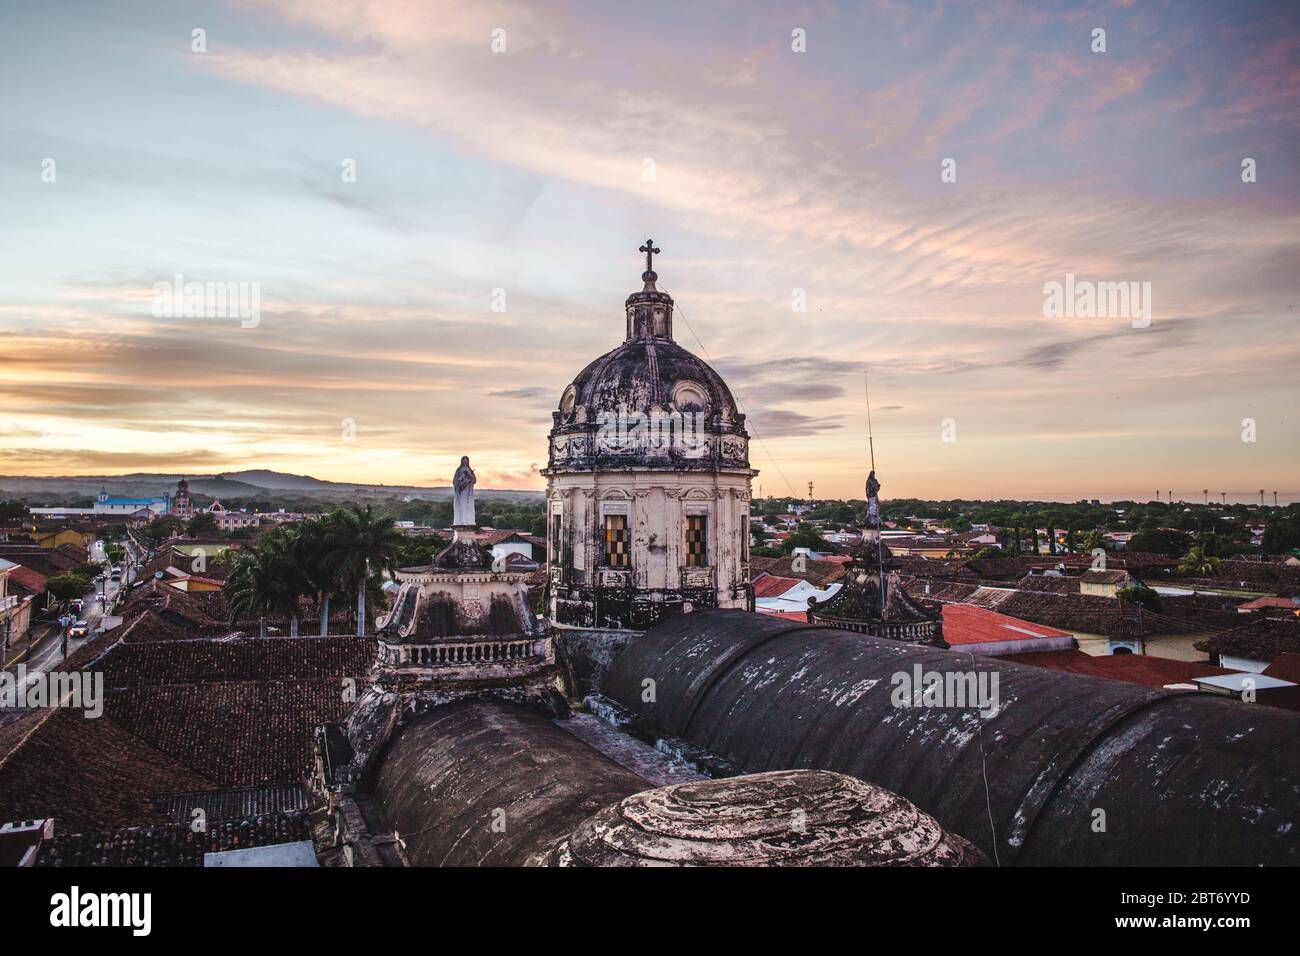 Gorgeous Baroque style church domed spire of the Iglesia La Merced in Granada, Nicaragua during a purple sunset Stock Photo